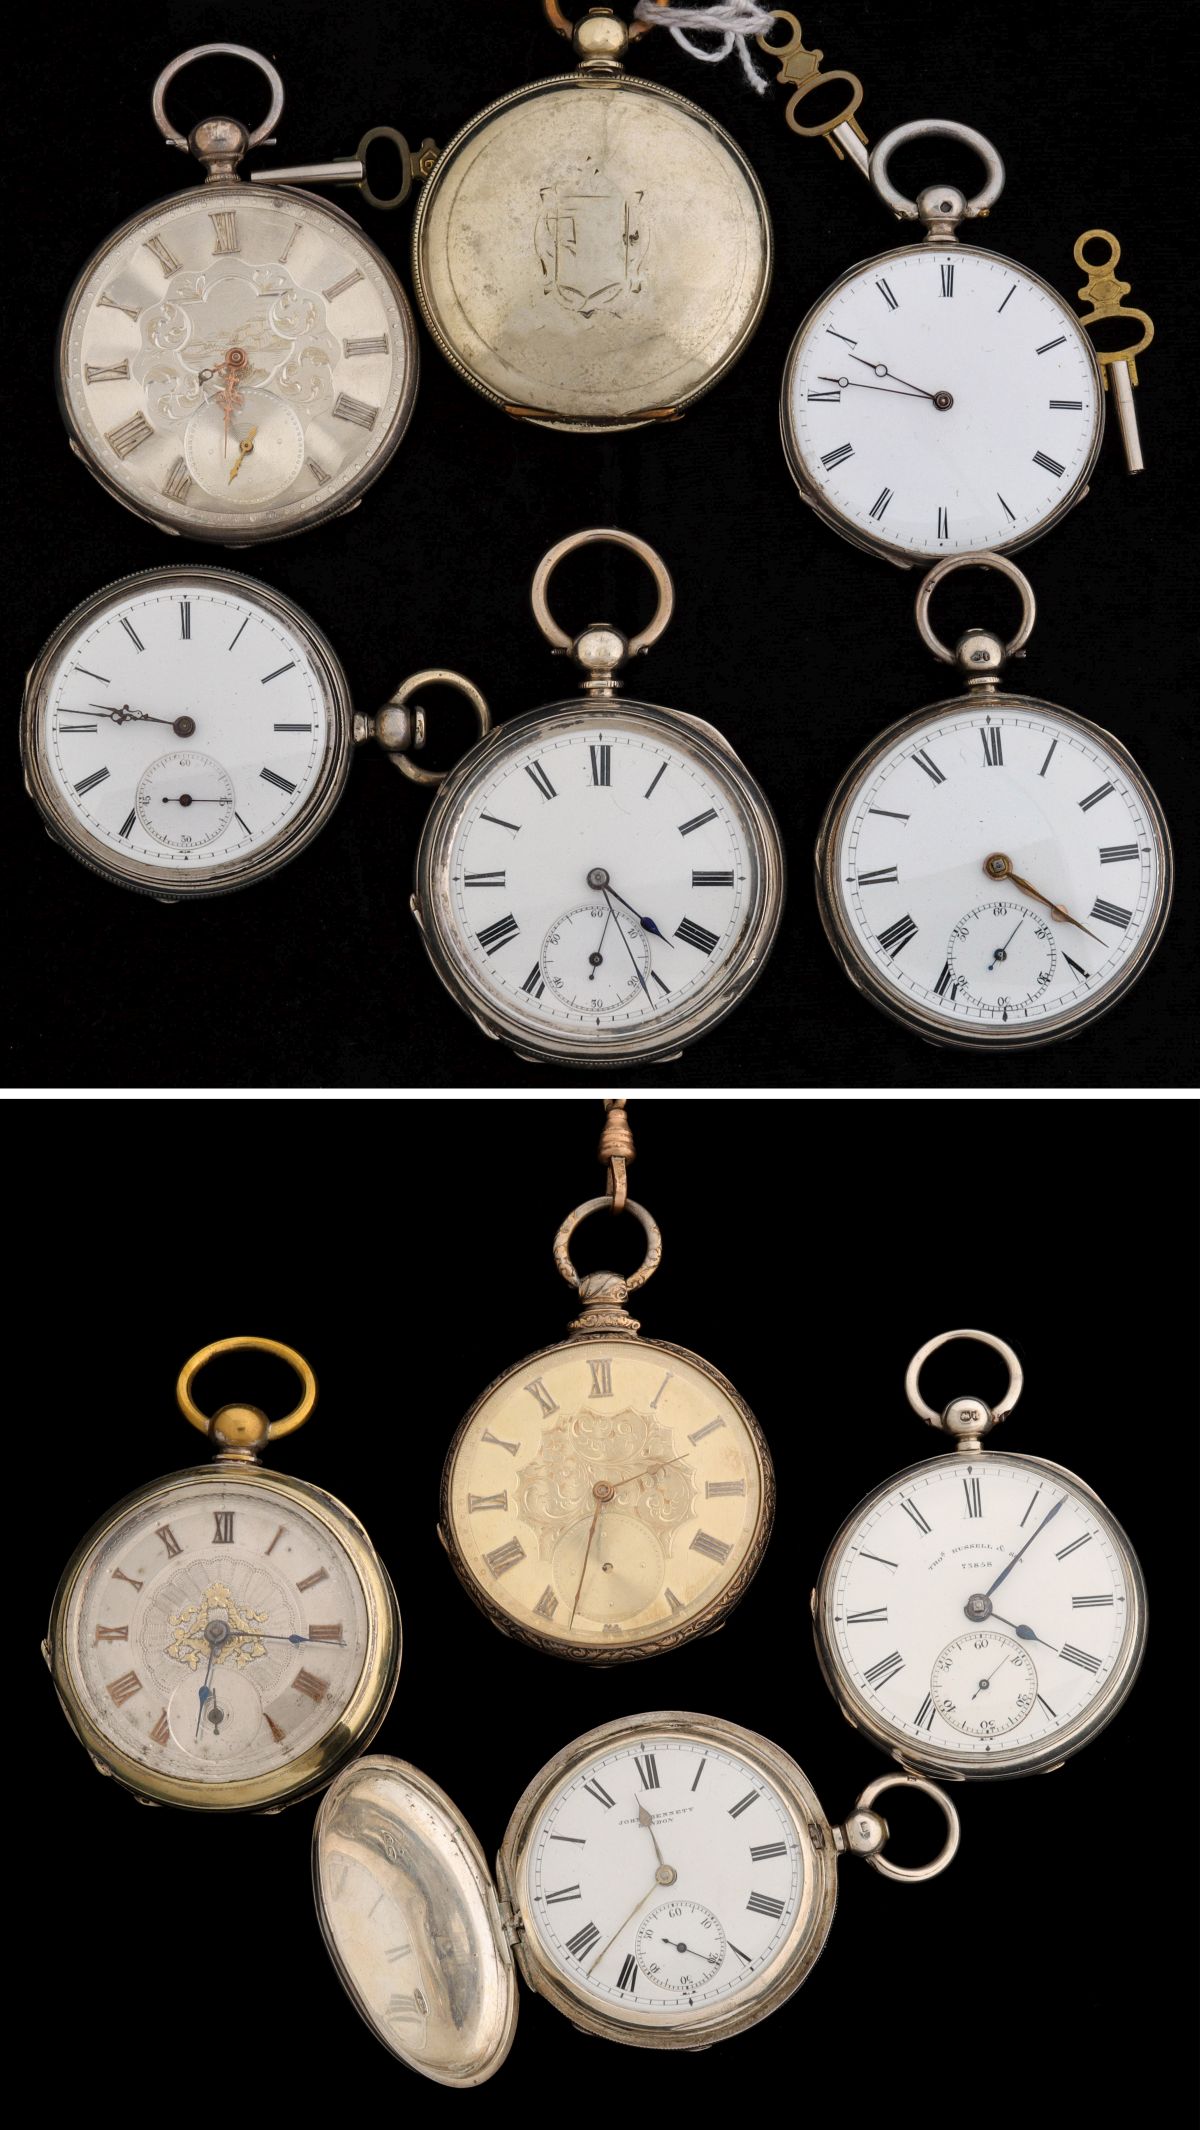 EARLY KEY WIND POCKET WATCHES IN NICKEL AND SILVER